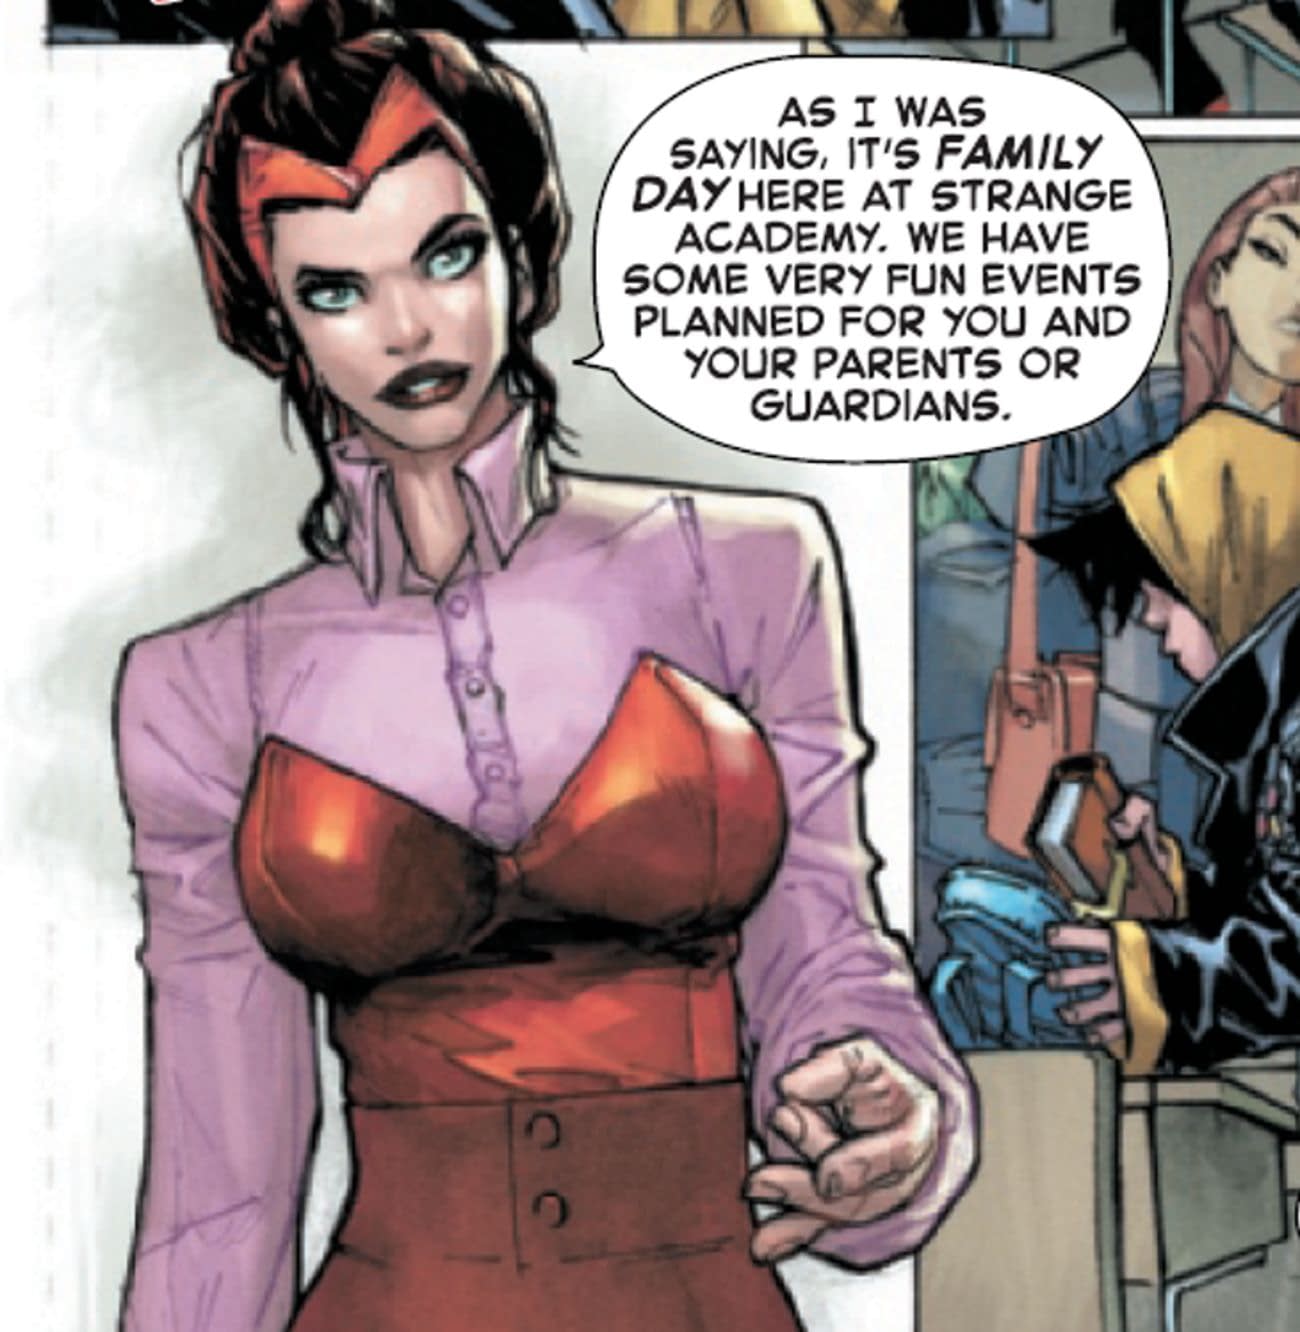 Only Place To Find Scarlet Witch In Marvel Comics Is Strange Academy